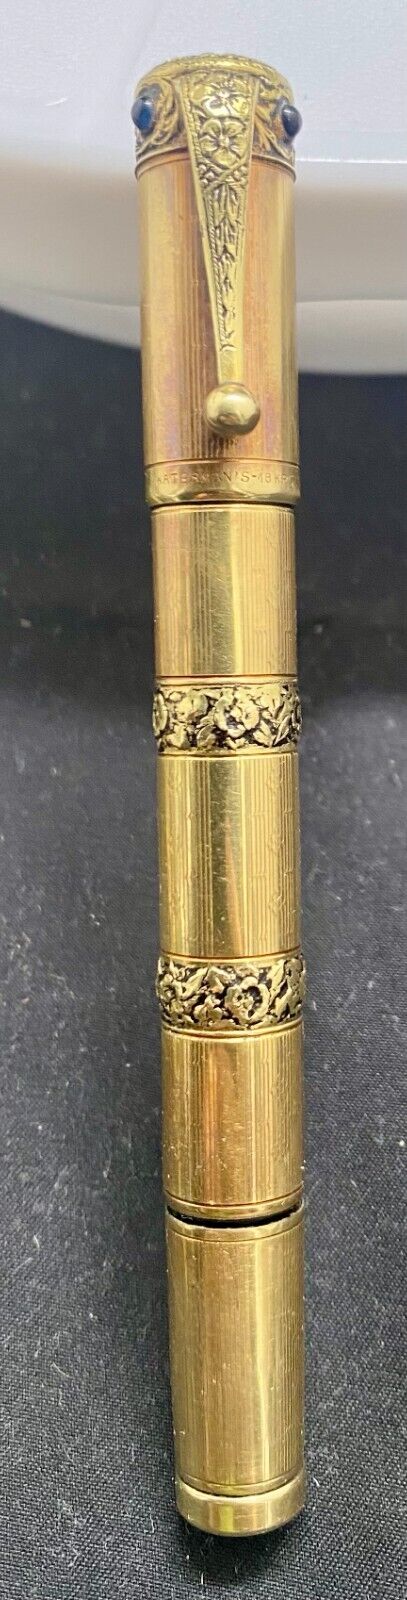 WATERMAN 42 SAFETY CONTINENTAL GOLD 18k OVERLAY & STONES FOUNTAIN PEN c1920 v/g